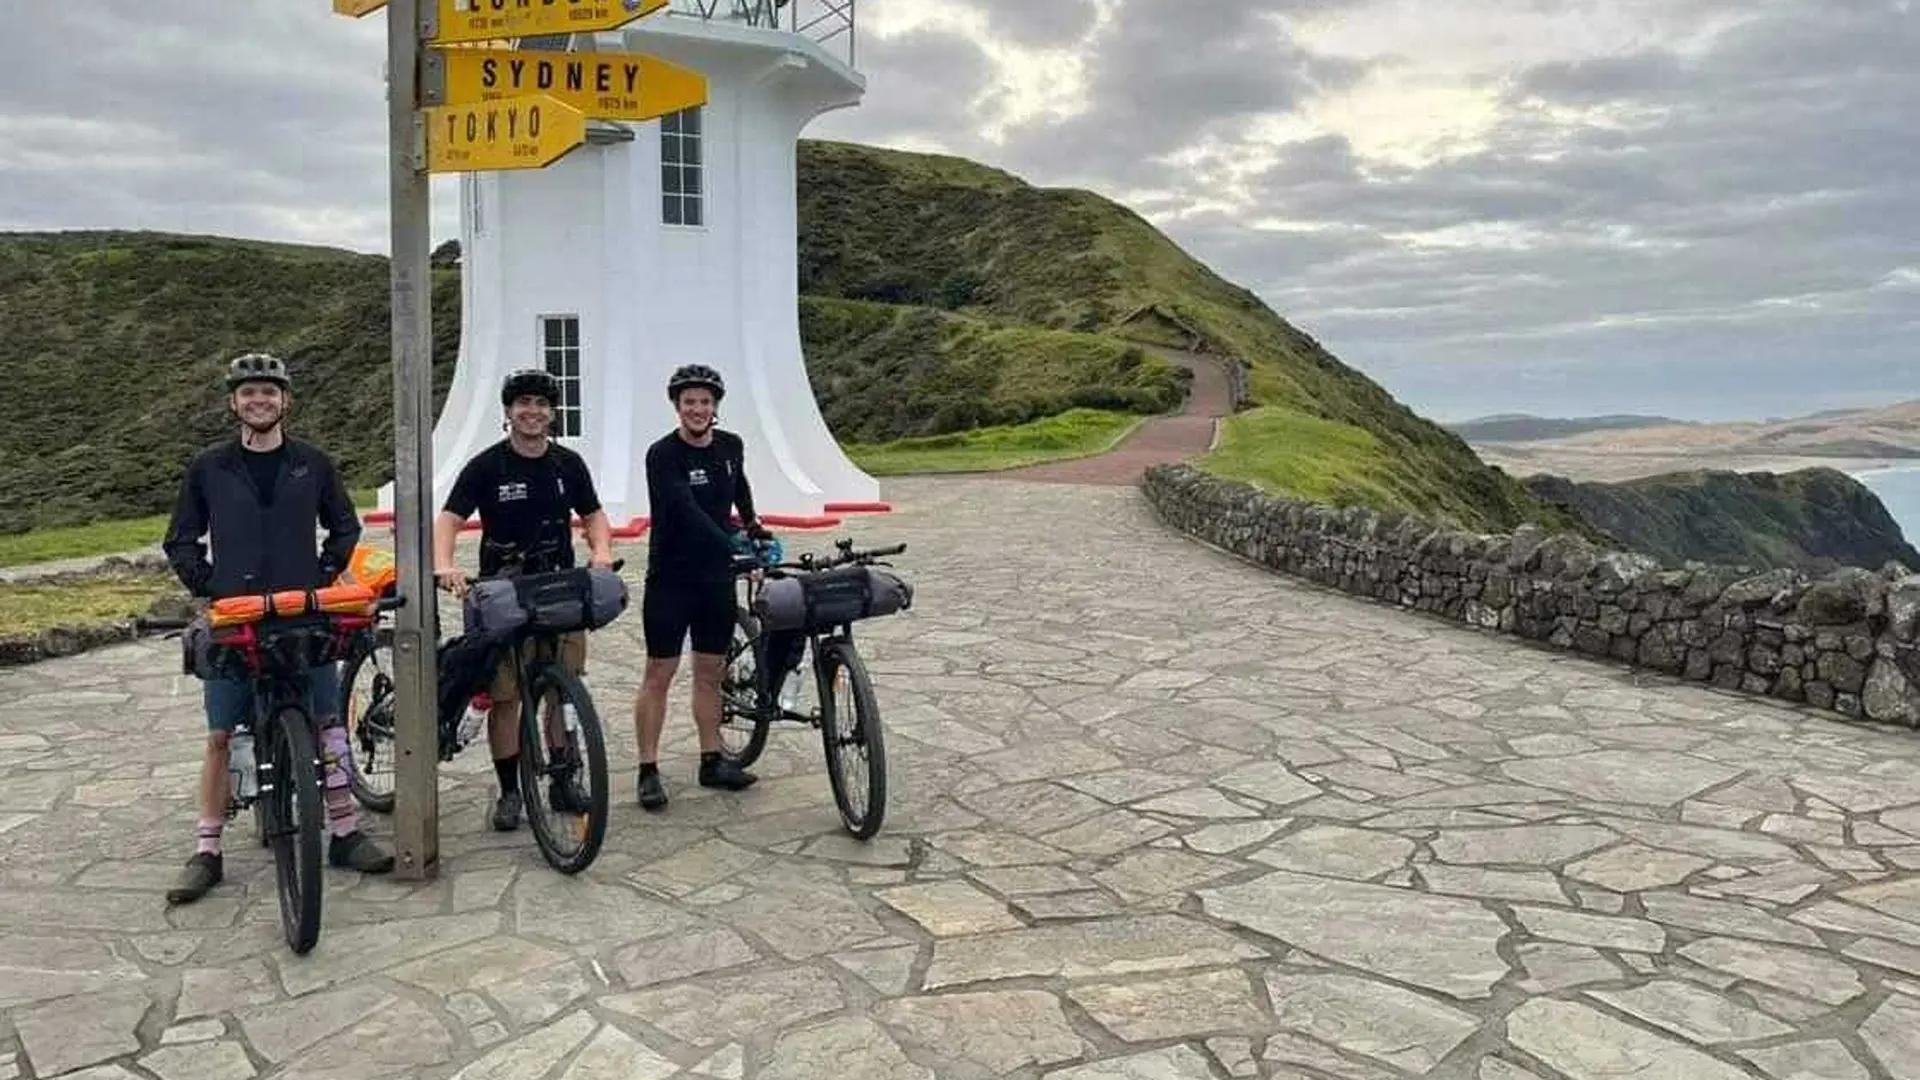 Three friends in riding attire, posing with their bicycles before a lighthouse.